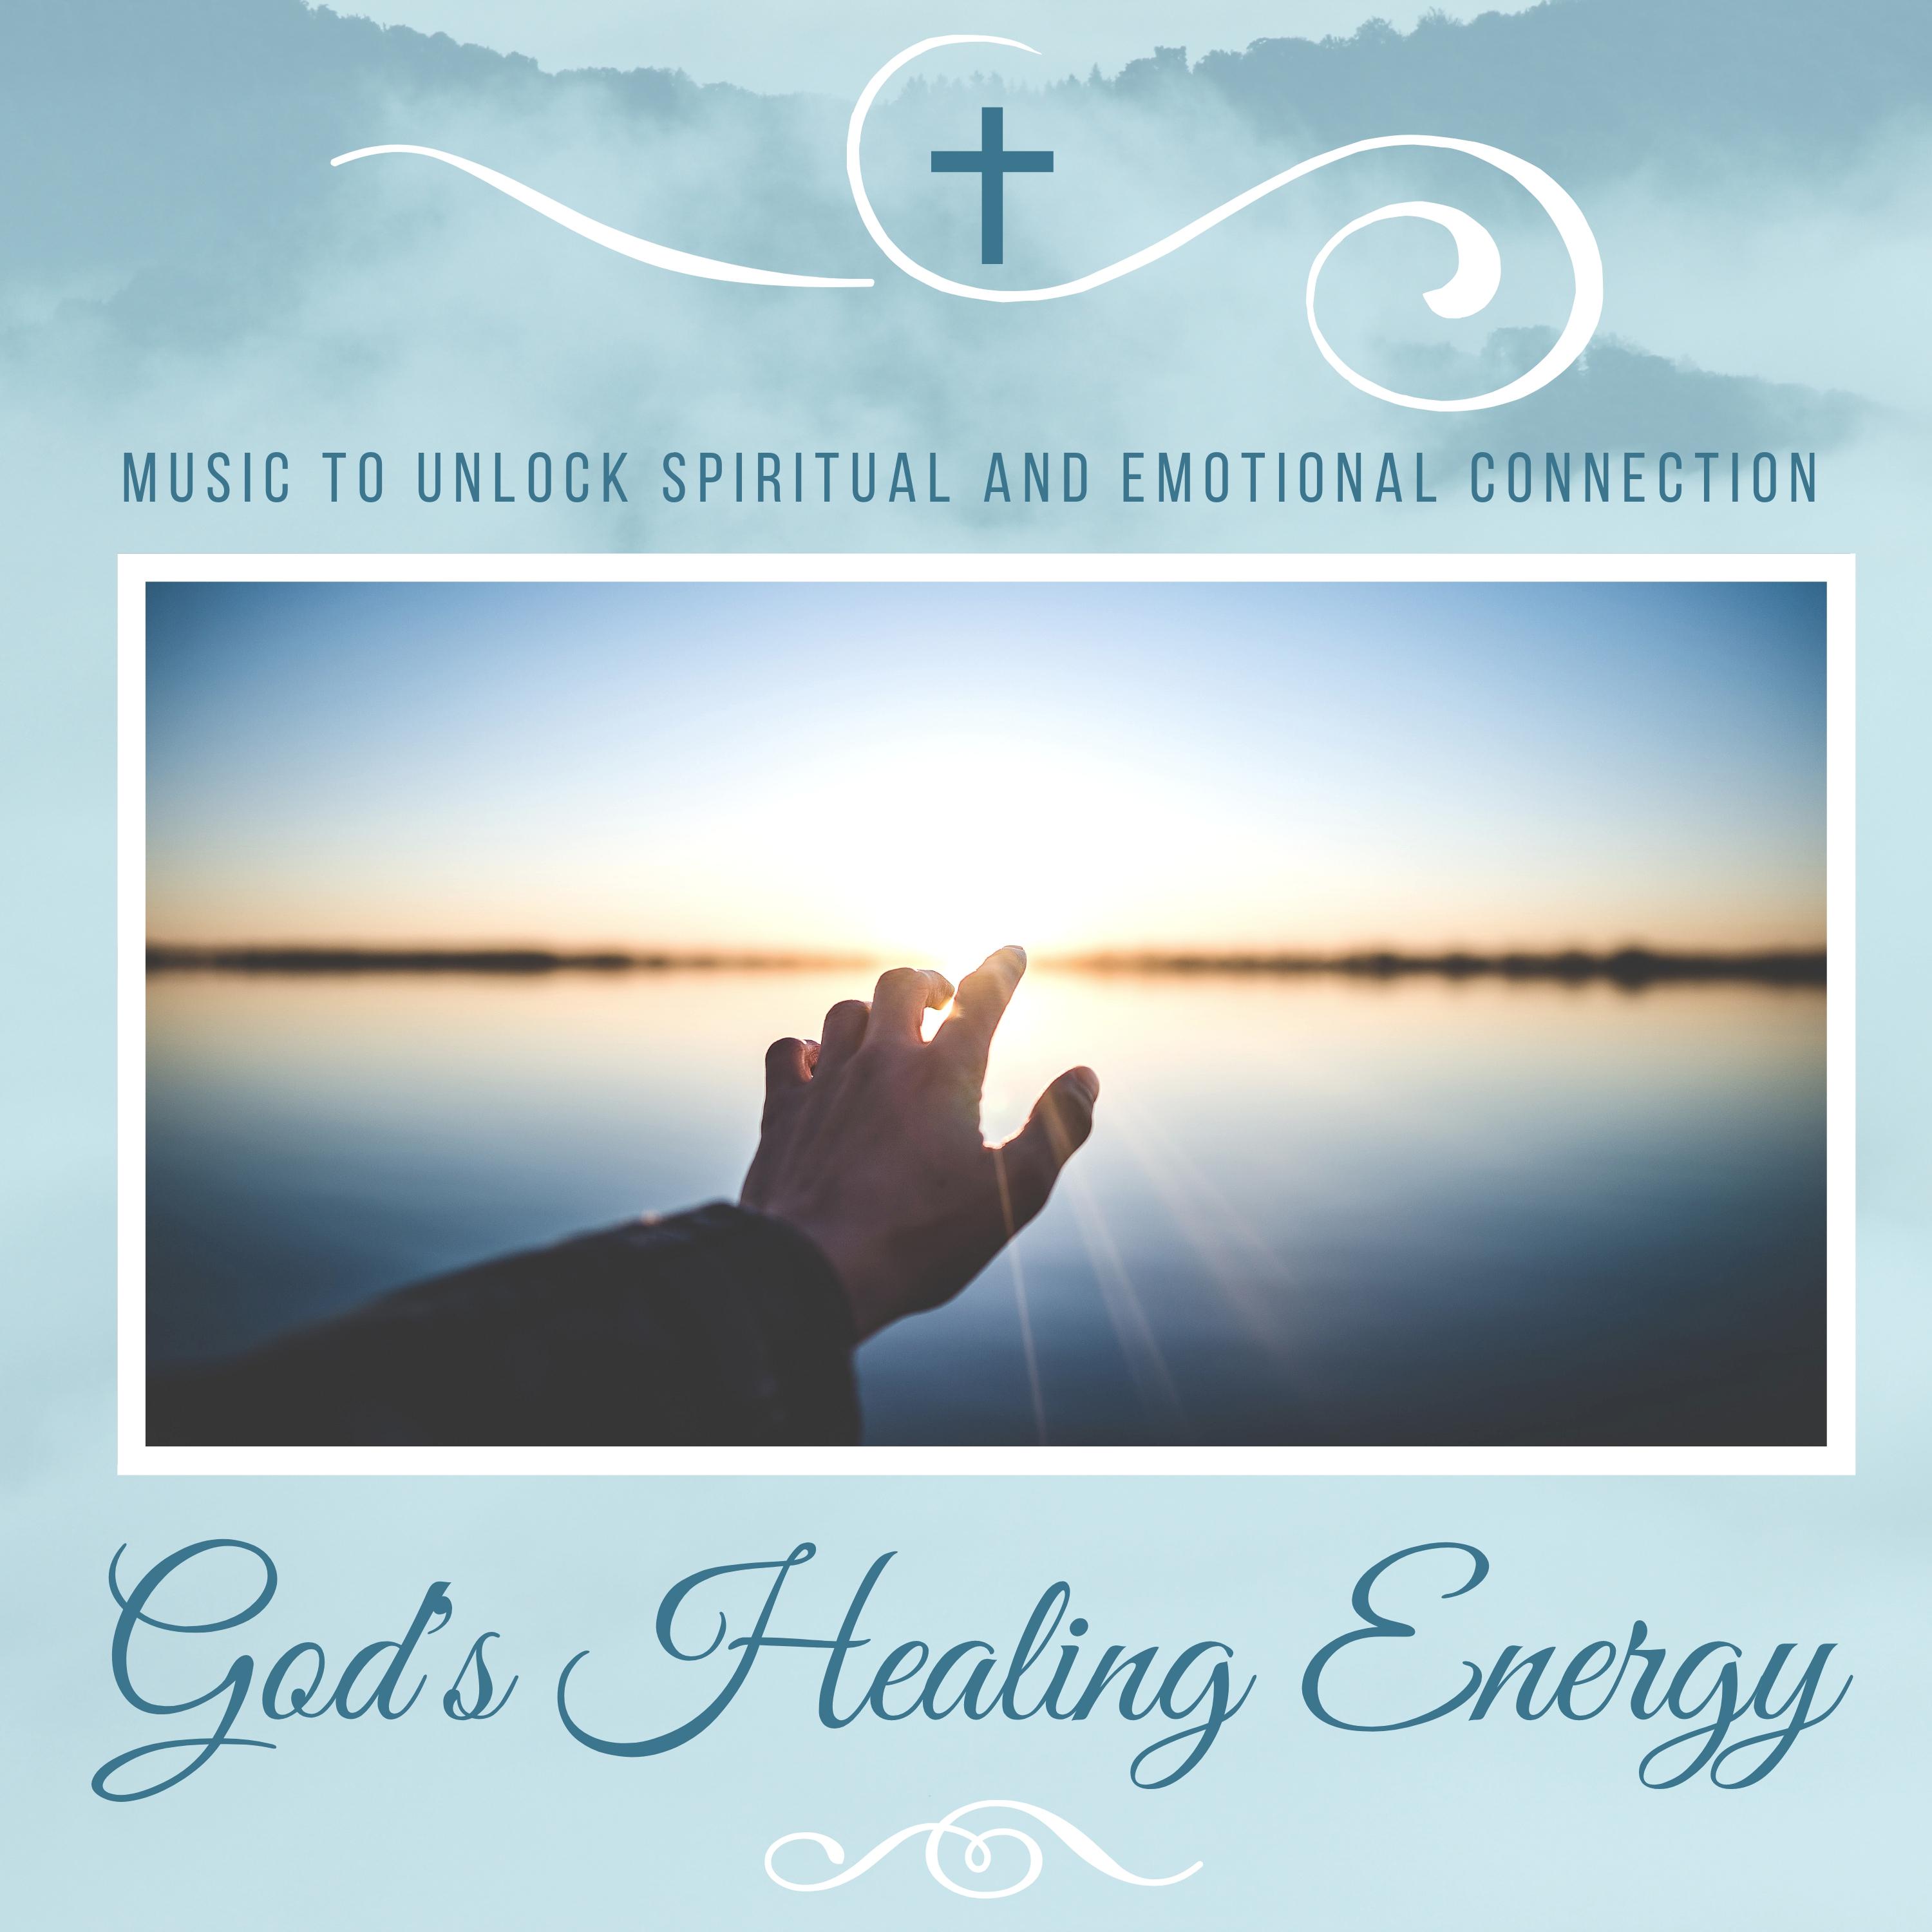 God's Healing Energy - Music to Unlock Spiritual and Emotional Connection